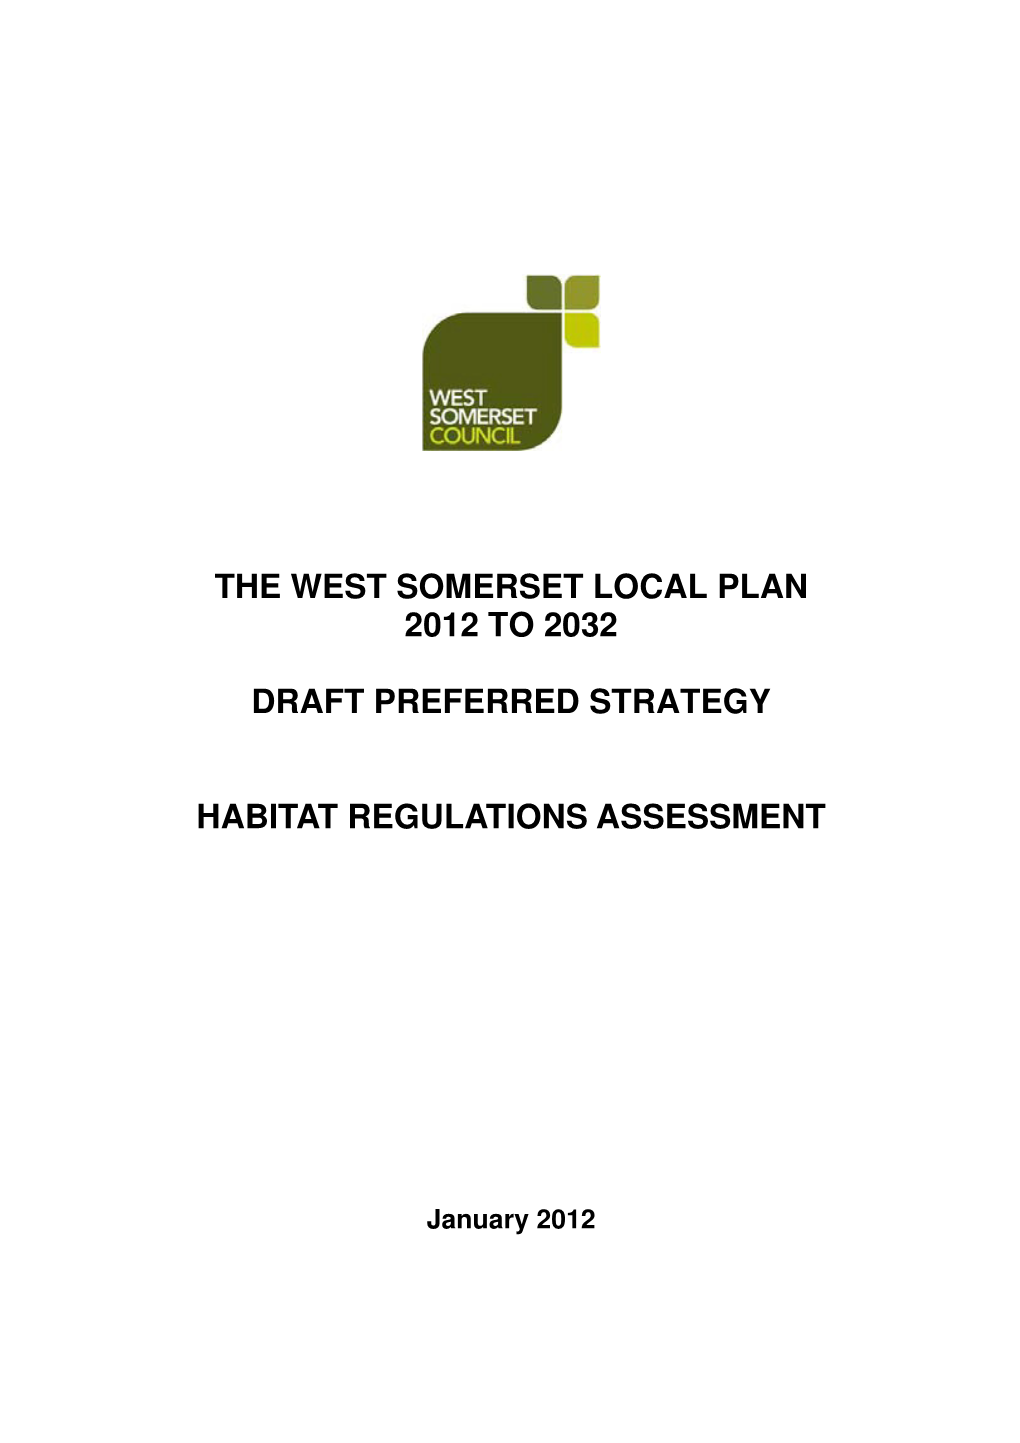 Habitats Regulations Assessment for the Preferred Strategy